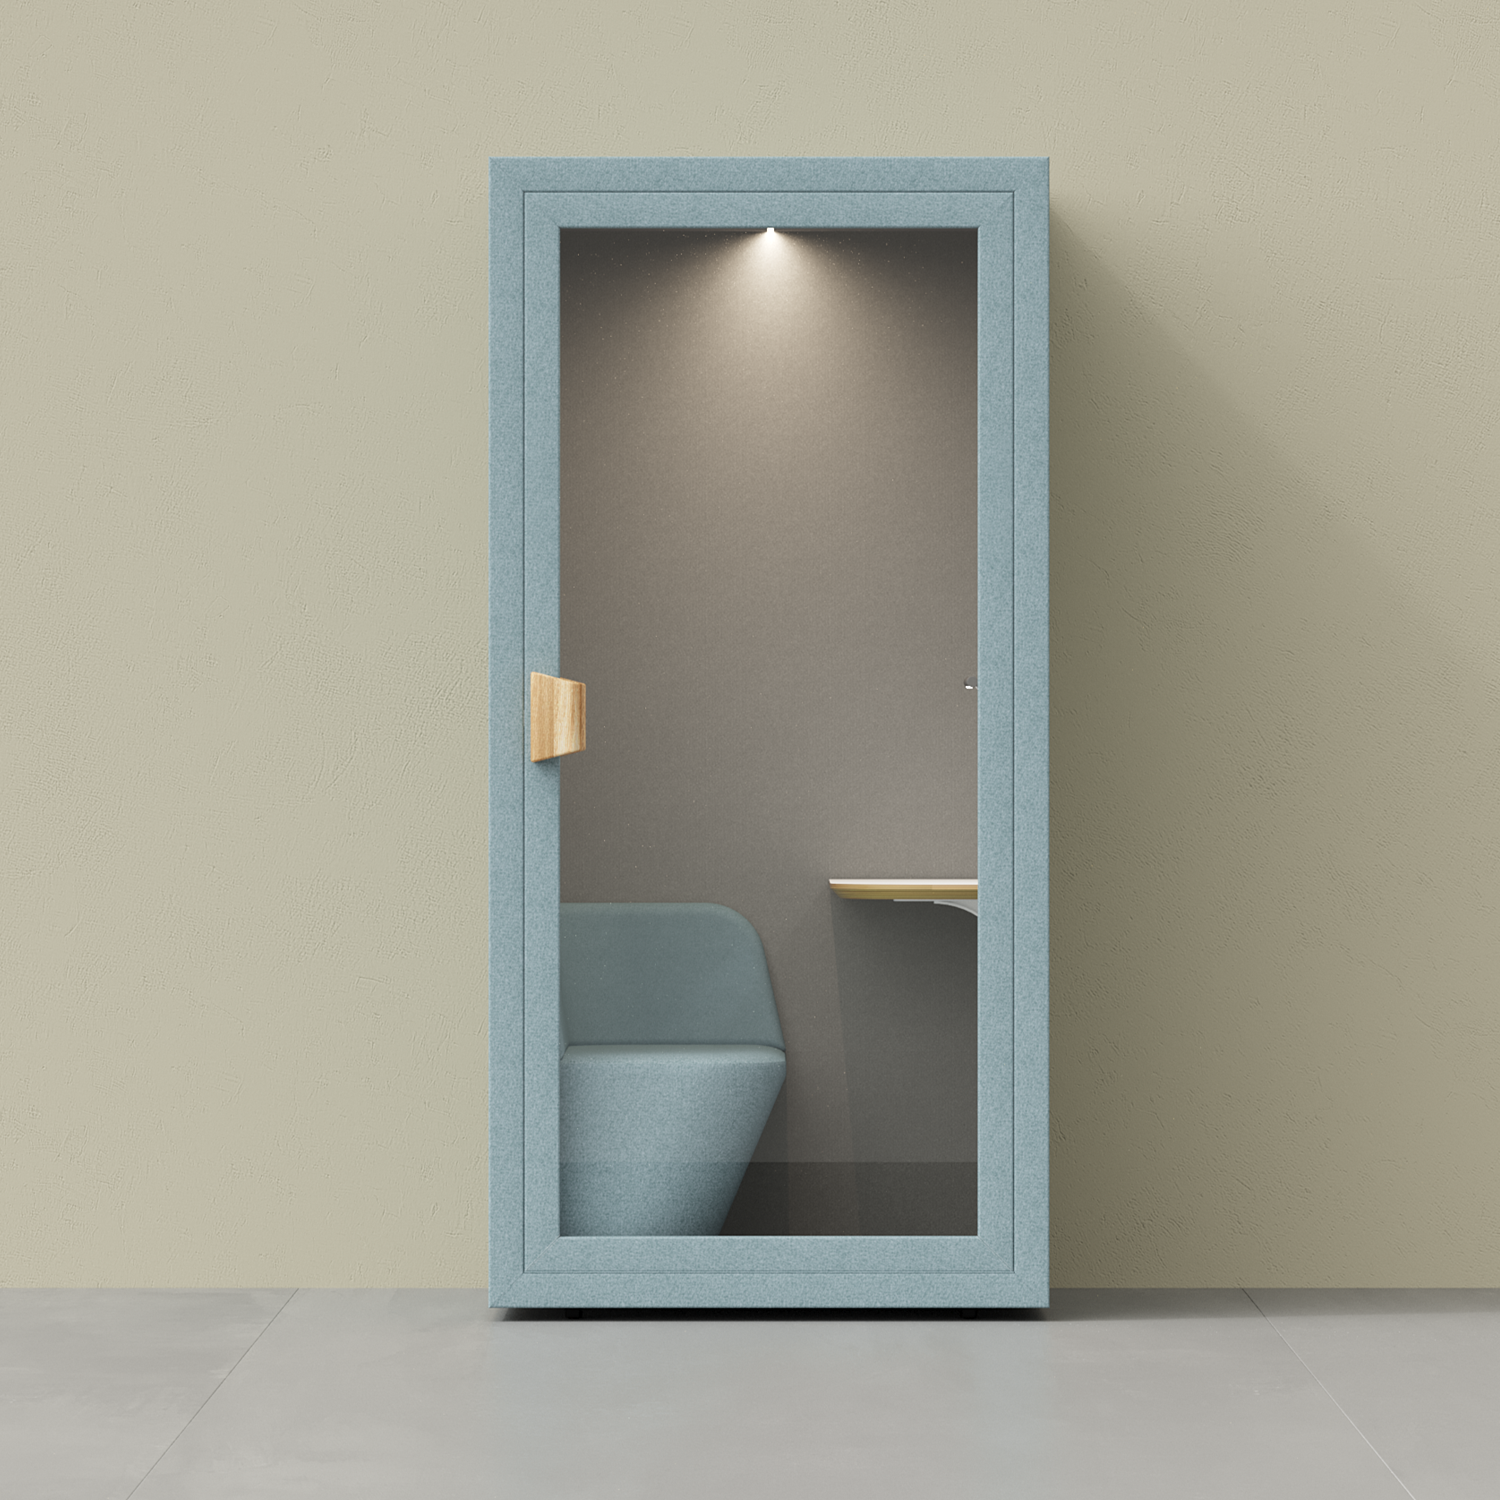 Soundproof Seated Folio Phone Booth